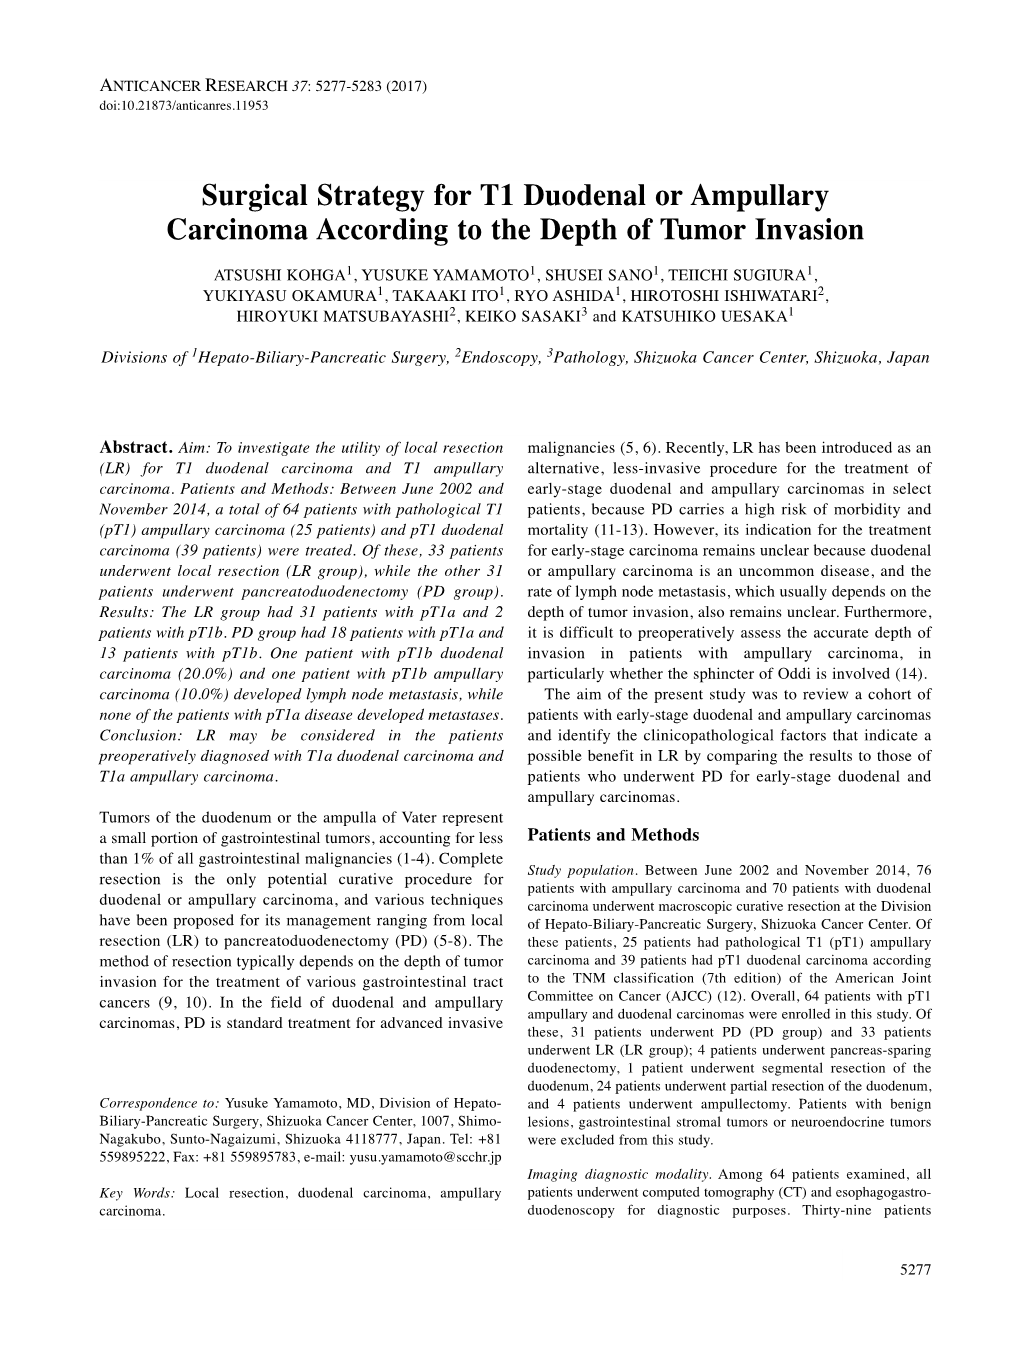 Surgical Strategy for T1 Duodenal Or Ampullary Carcinoma According To